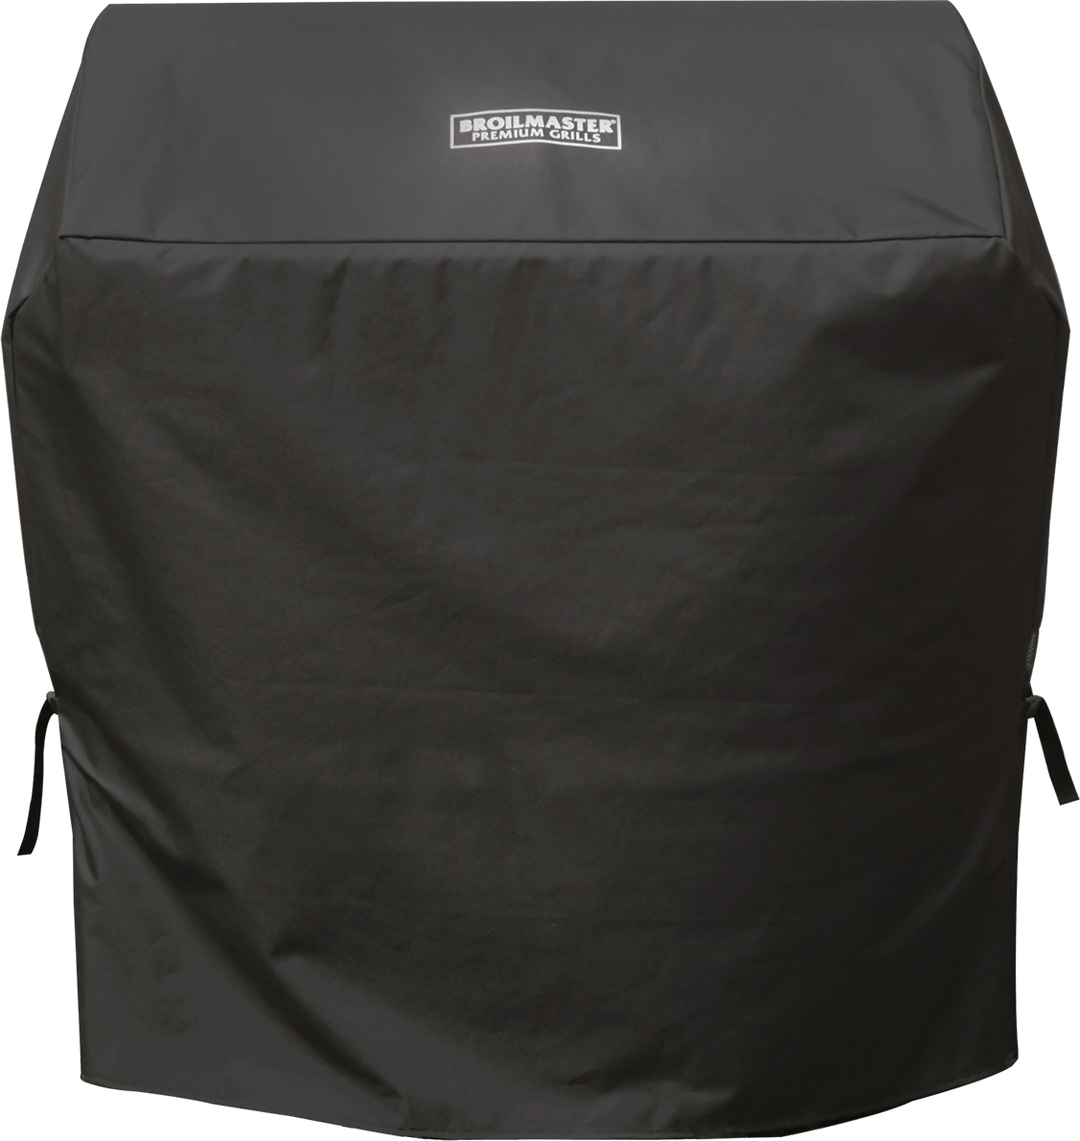 Broilmaster 26-Inch Grill on Cart Cover BSACV26L outdoor kitchen empire